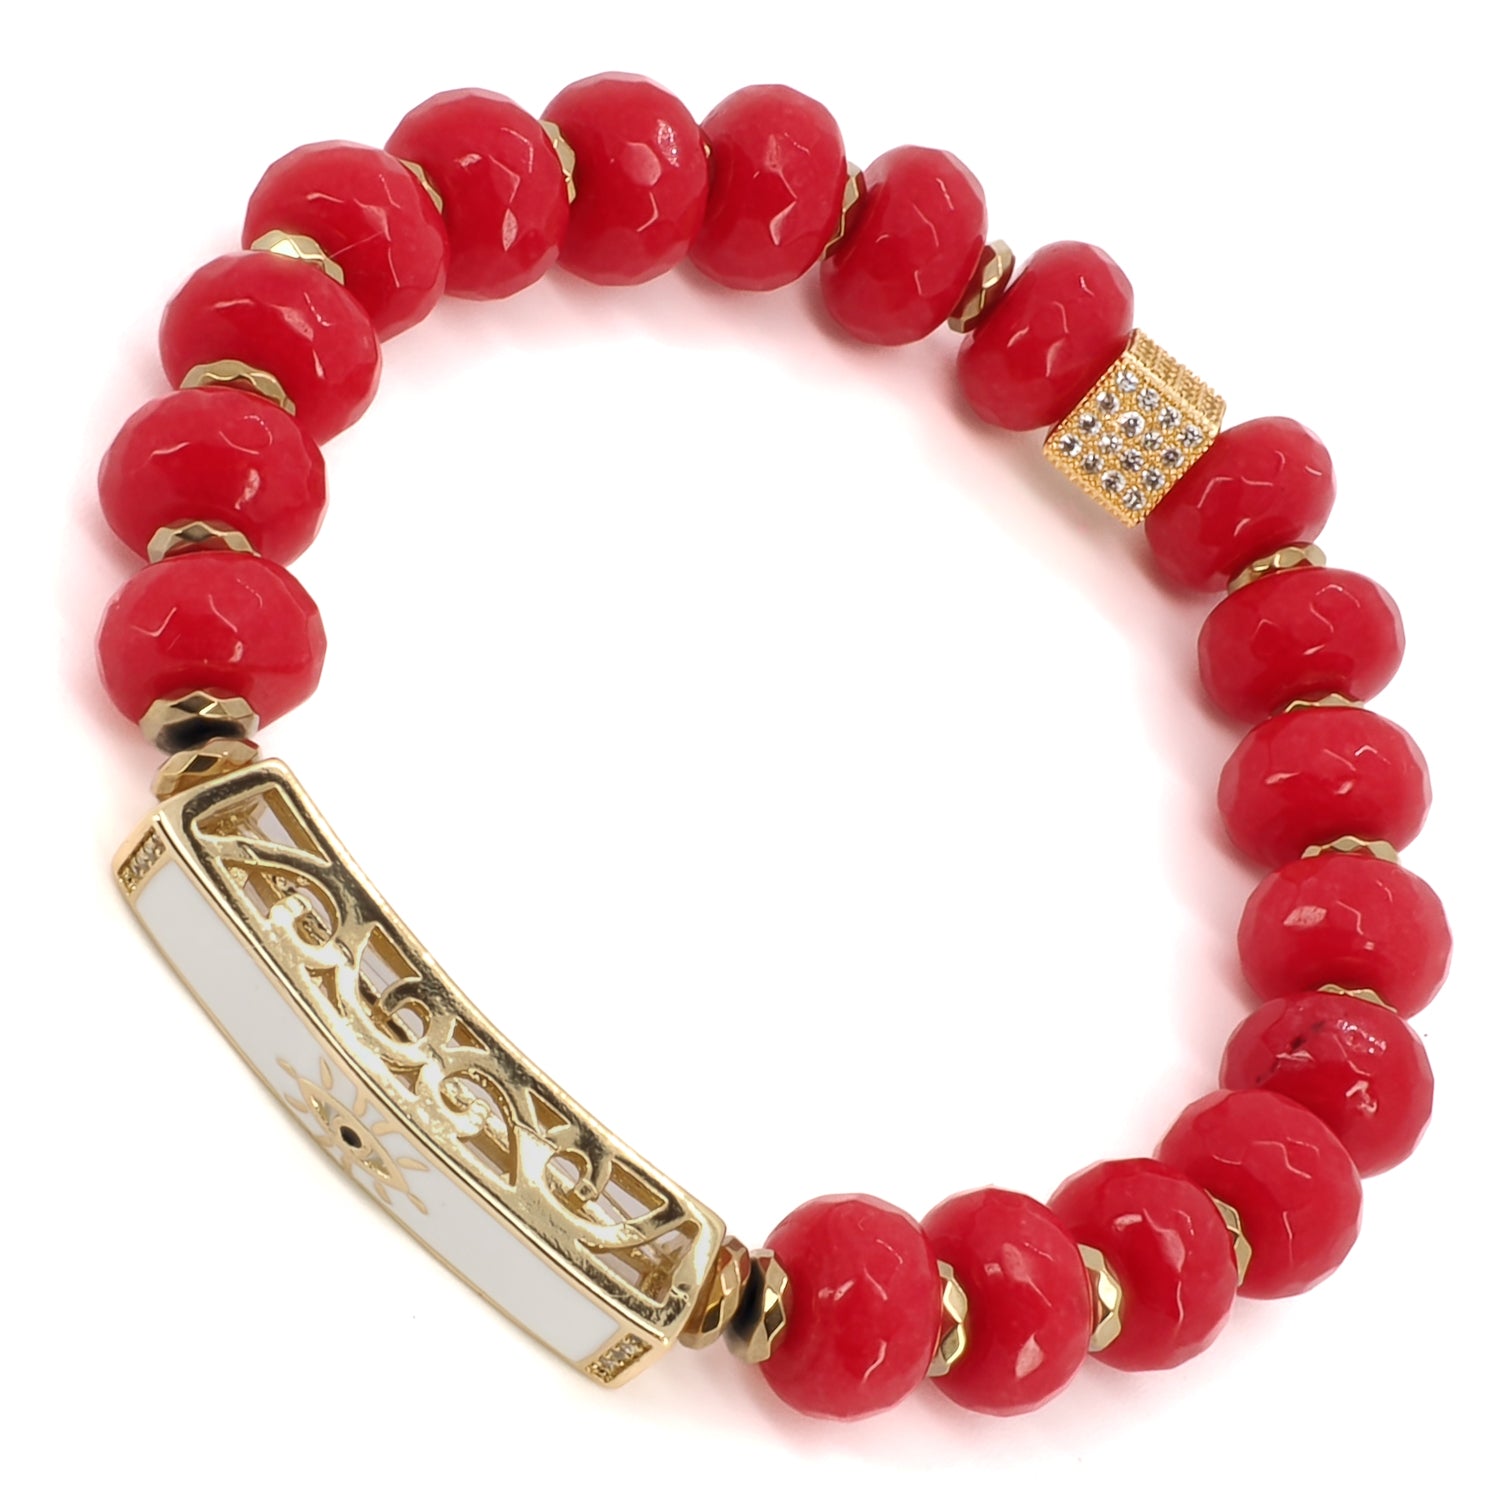 The Red Energy Evil Eye Bracelet combines style and spiritual protection, featuring a striking evil eye charm and red coral stone beads.